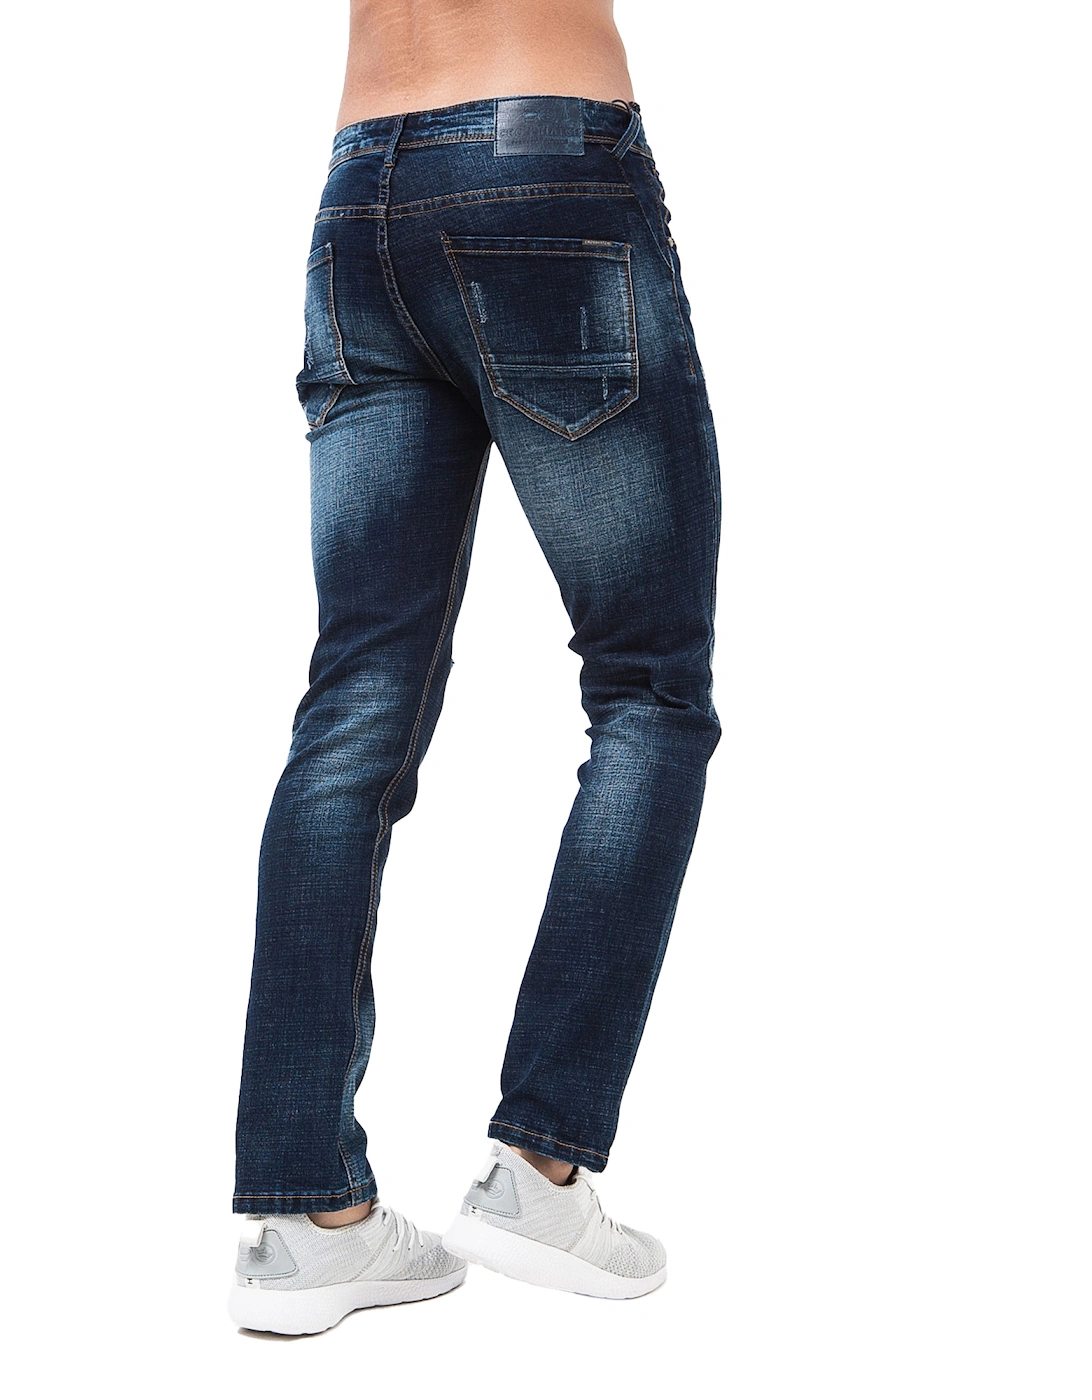 Mens Chantilly Jeans